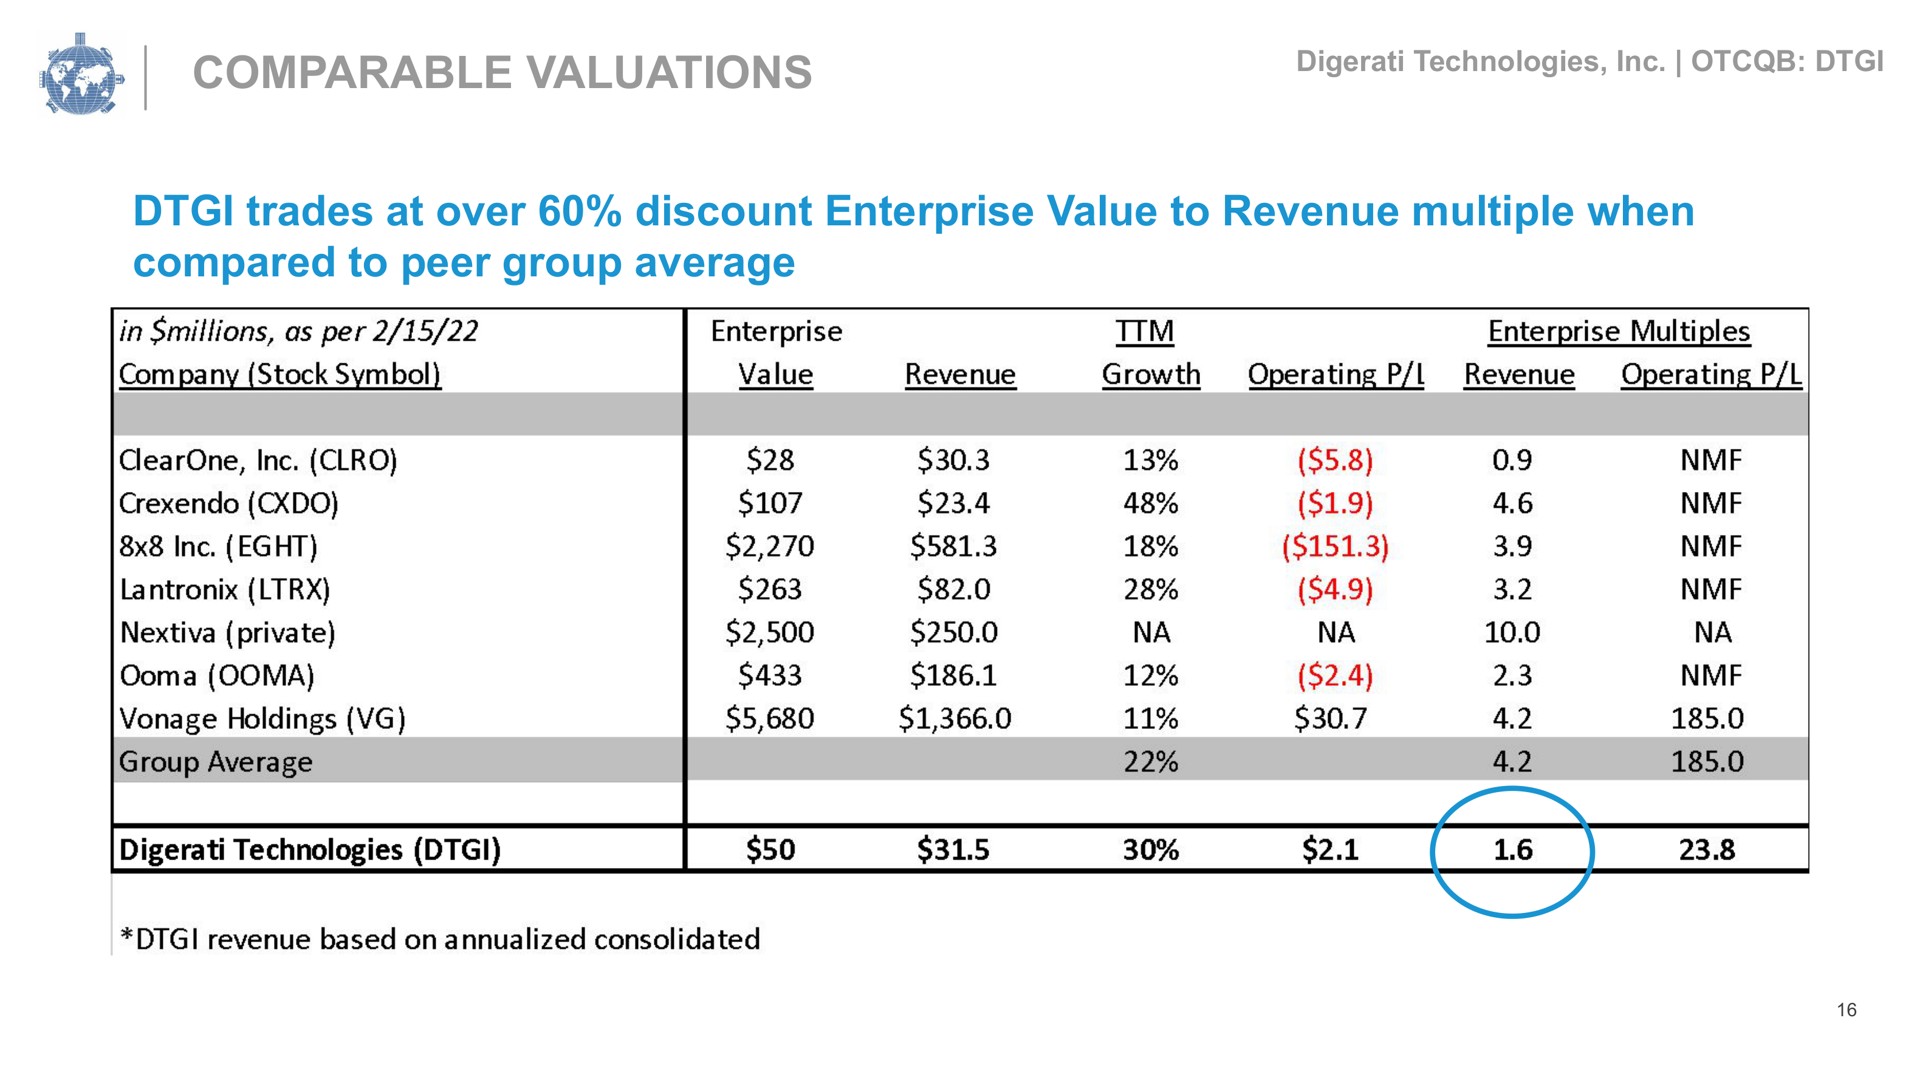 comparable valuations trades at over discount enterprise value to revenue multiple when compared to peer group average on a | Digerati